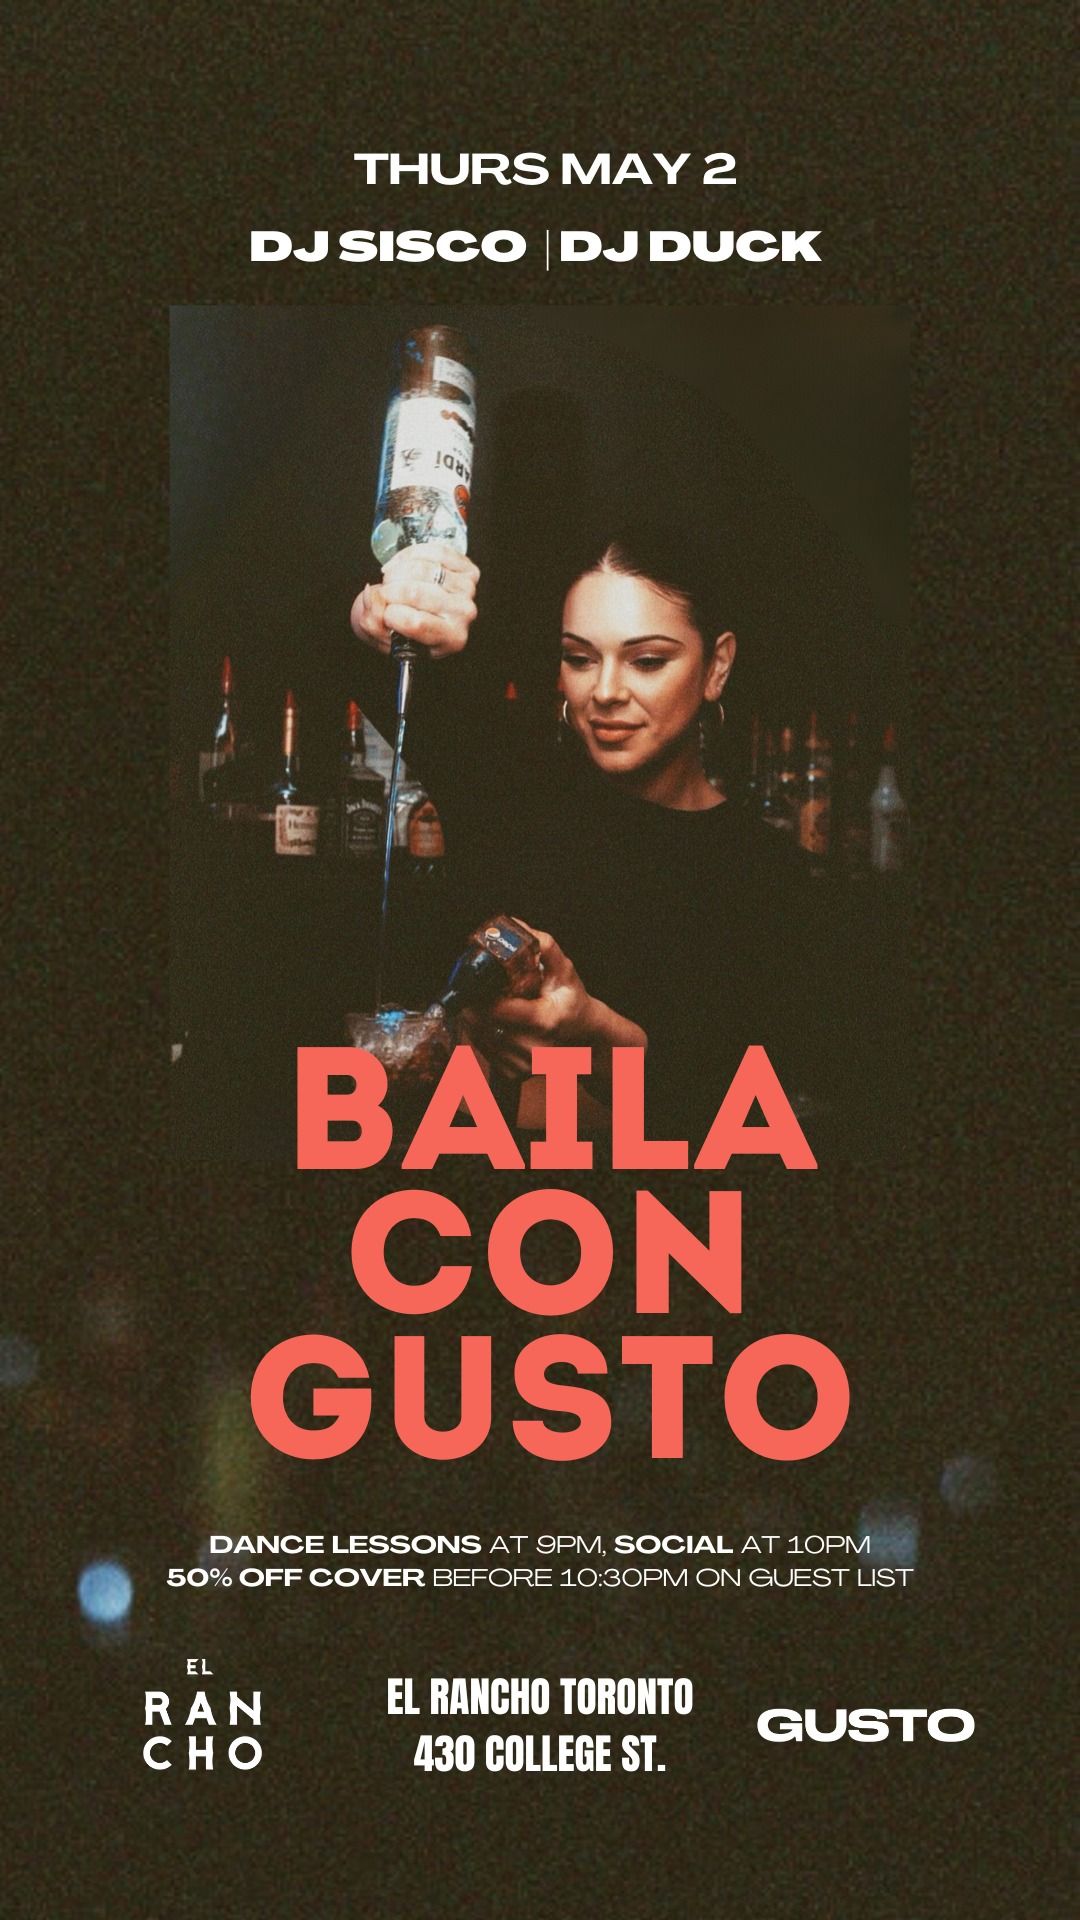 Baila Con Gusto - 50% Off Cover on Guest List